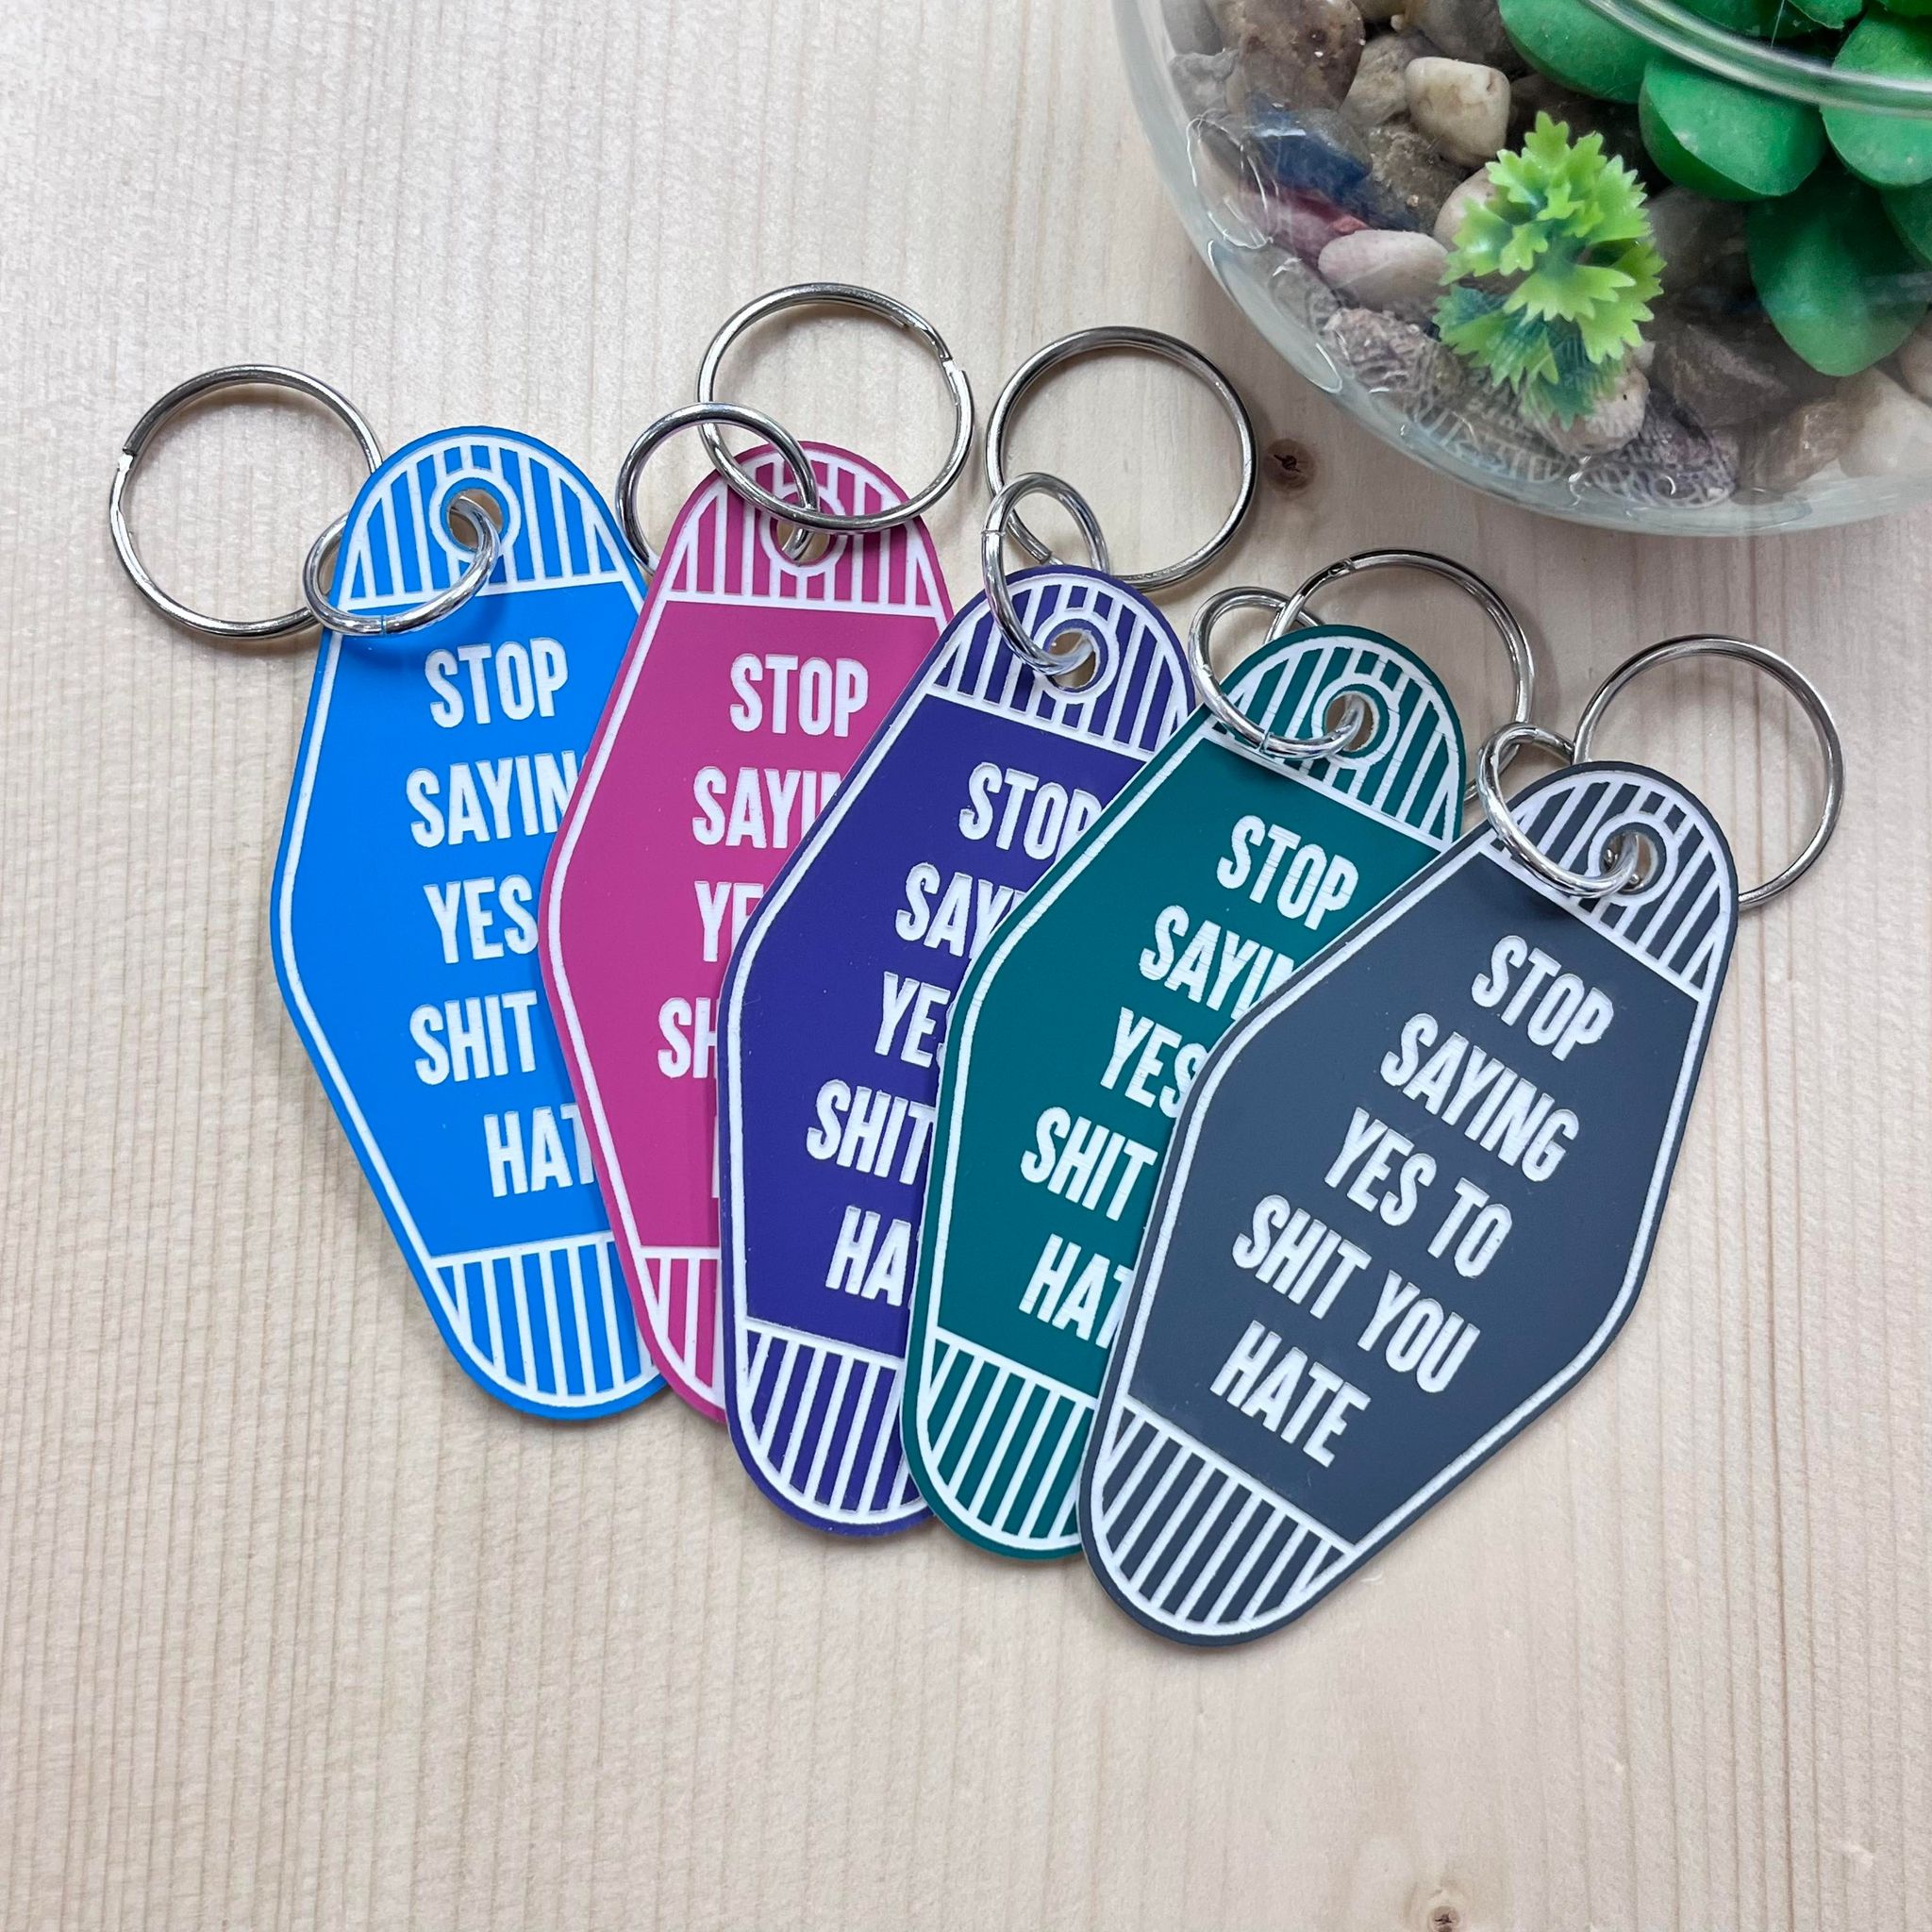 Stop Saying Yes to Shit You Hate Motel Keychain